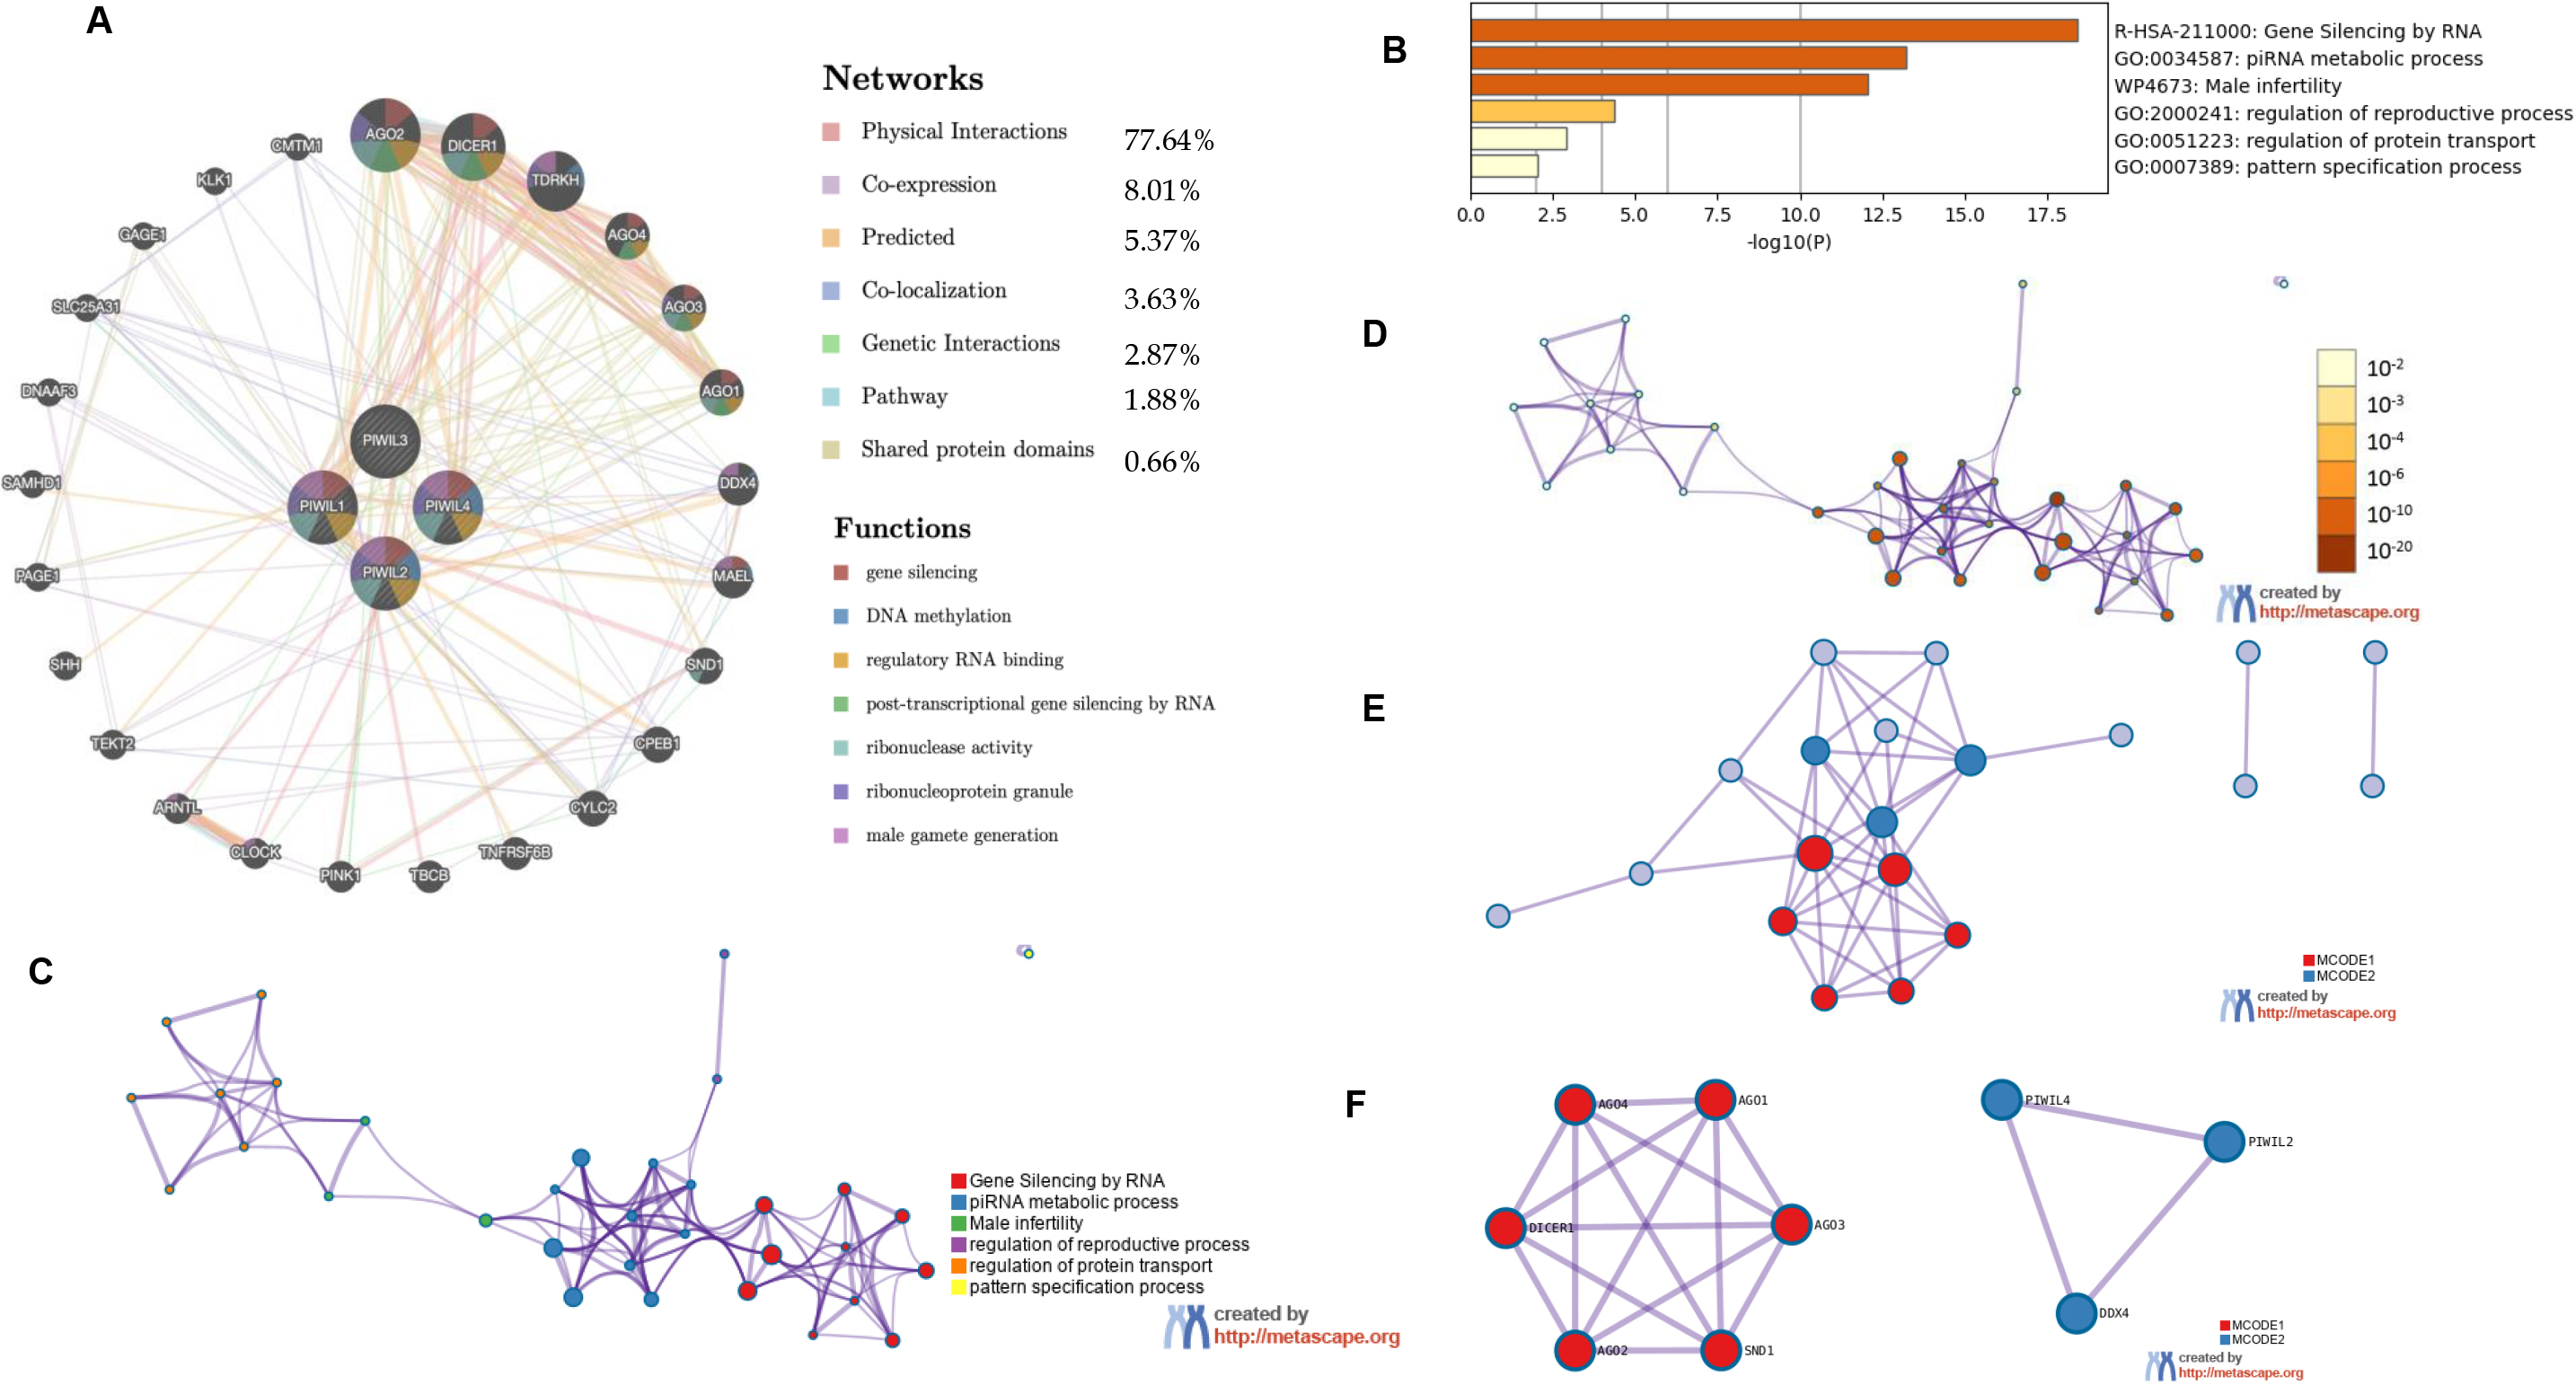 (A) Genemania generated Network for PIWIL1, PIWIL2, PIWIL3, PIWIL4 and function predictions (B) Metascape results for Enriched ontology clusters. (C) PIWIL Subset network with force-directed clustering (D) Enriched network according to statistical significance, the darker the color, the more statistically significant the node is. (E) protein-protein interactions’ network from PIWIL genes. (F) Results for MCODE algorithm to identify neighborhoods where proteins are densely connected.